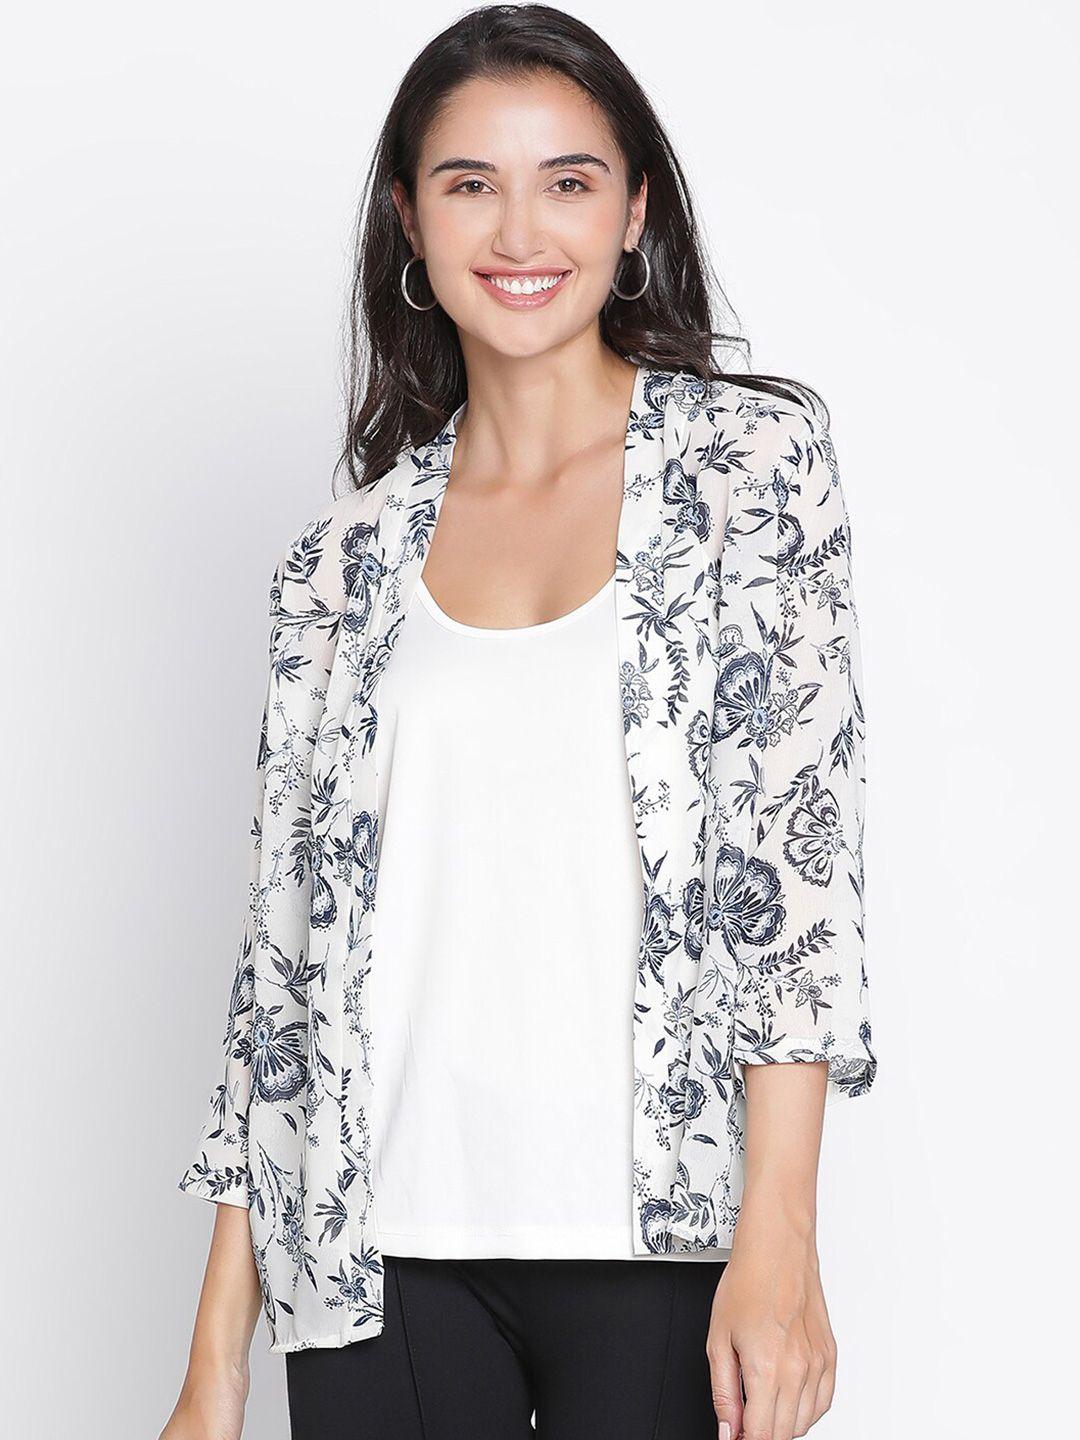 draax-fashions-floral-printed-open-front-shrug